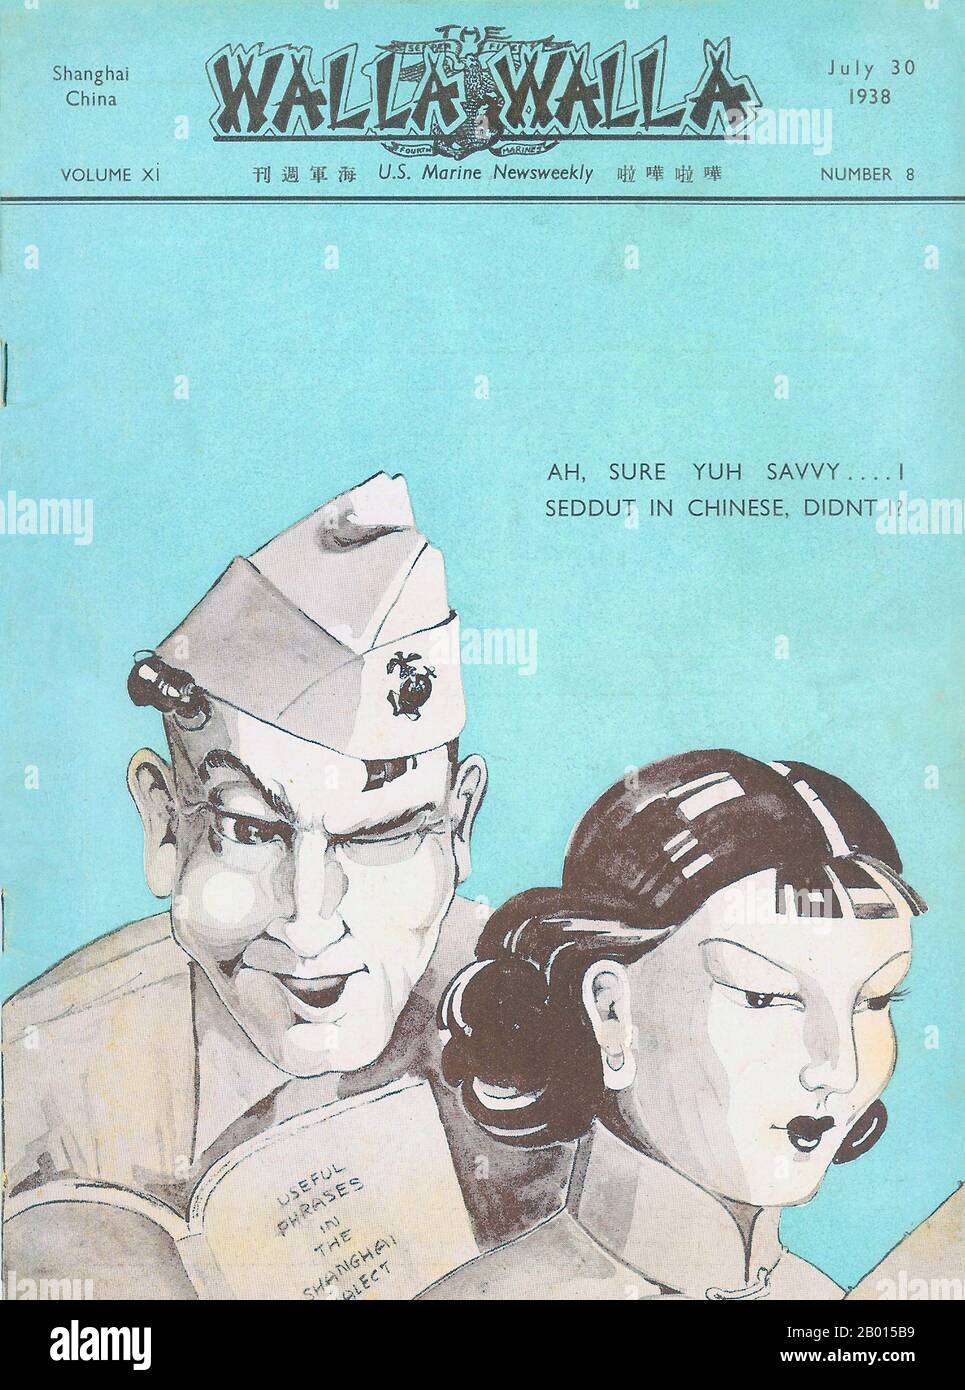 China: Front cover of Walla Walla, US Marine News Weekly, July 30 1938.  Satirical cartoon on US marine learning Shanghainese, or Wu dialect of Chinese. Stock Photo